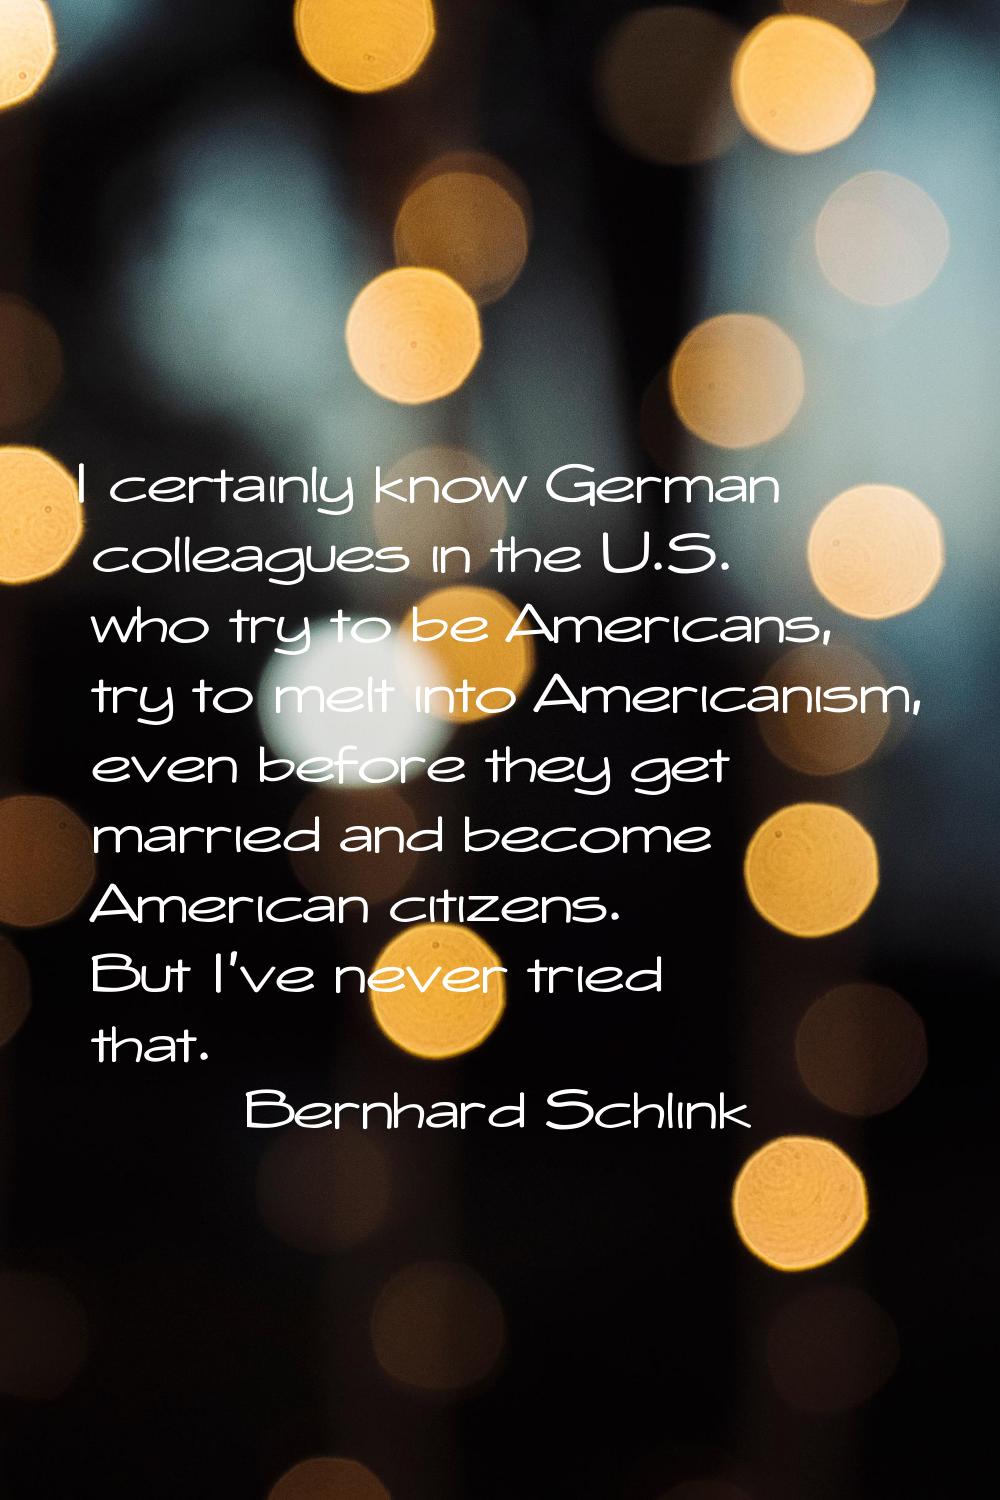 I certainly know German colleagues in the U.S. who try to be Americans, try to melt into Americanis